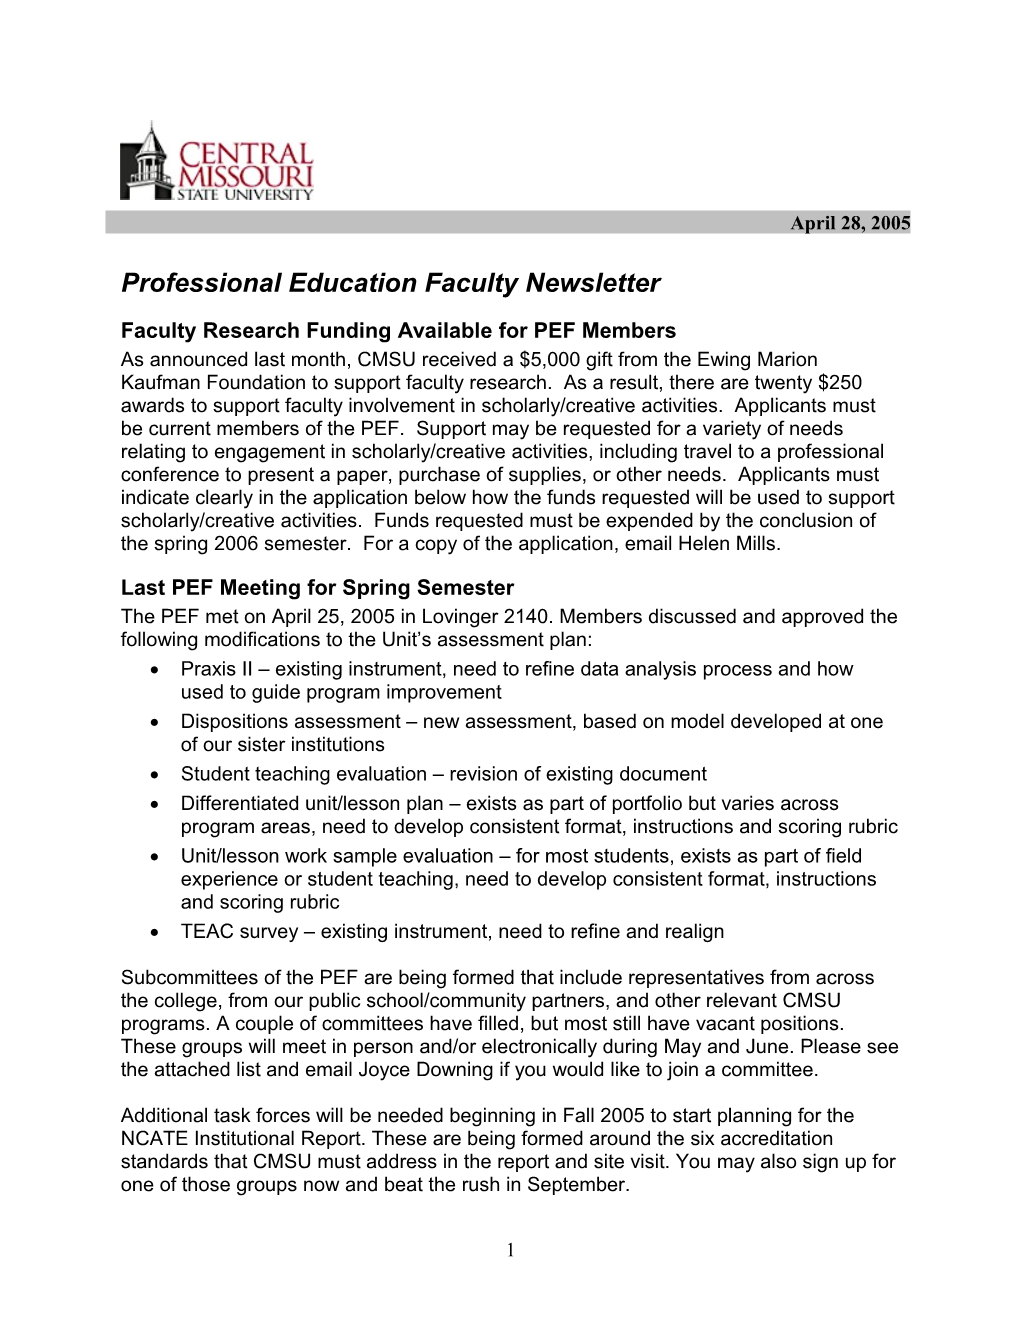 Professional Education Faculty Newsletter